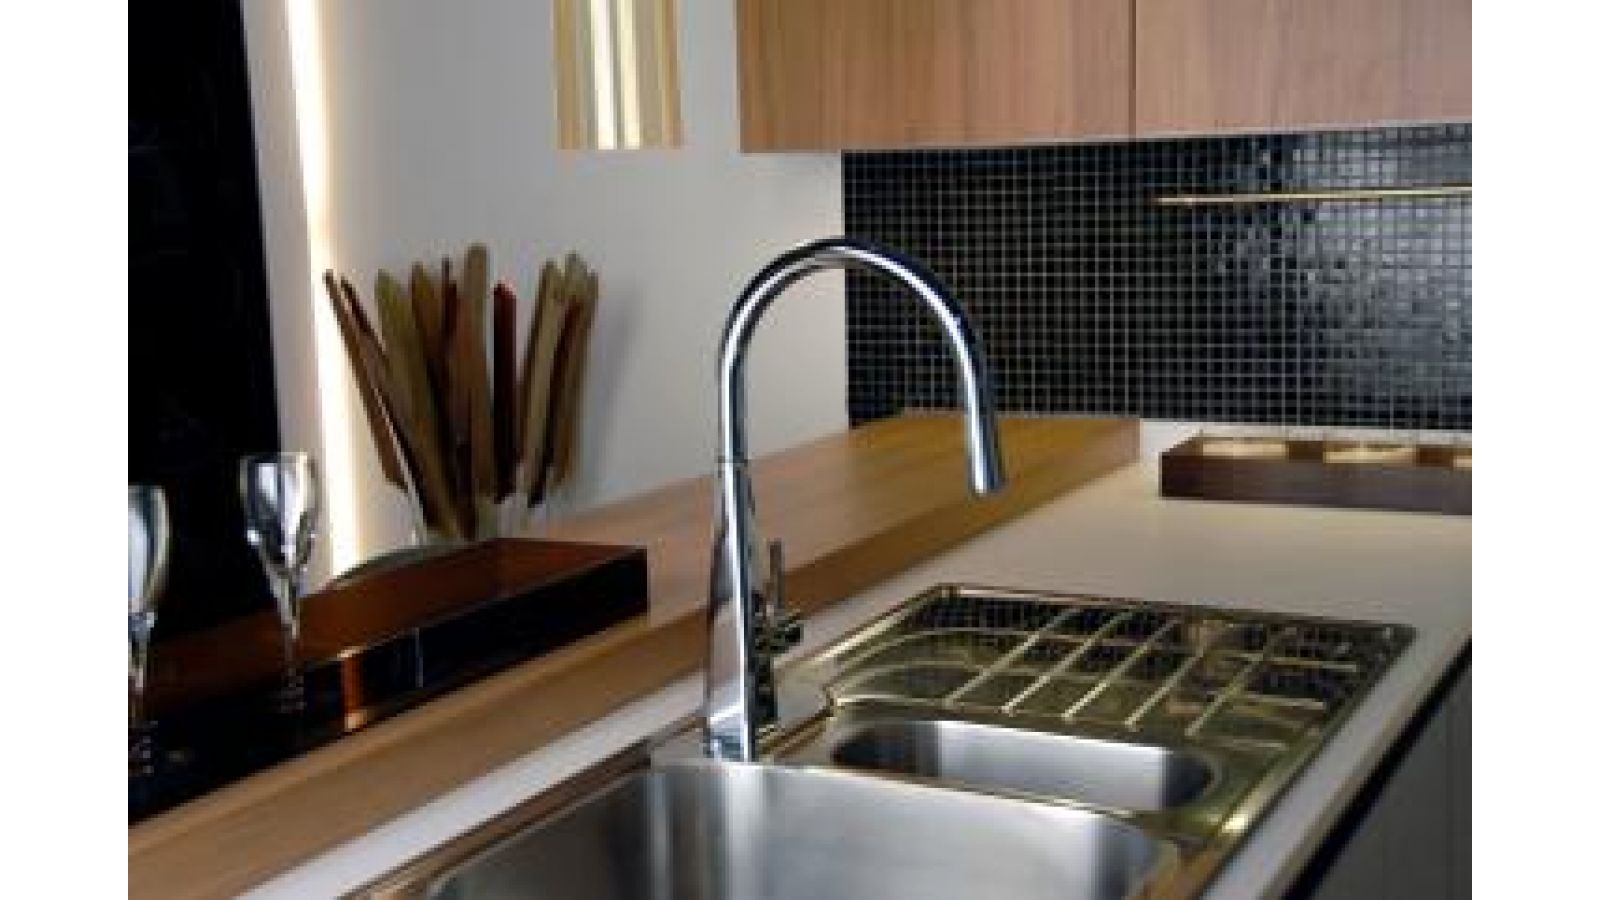 Natalia Kitchen Faucet with Pull Down Spout